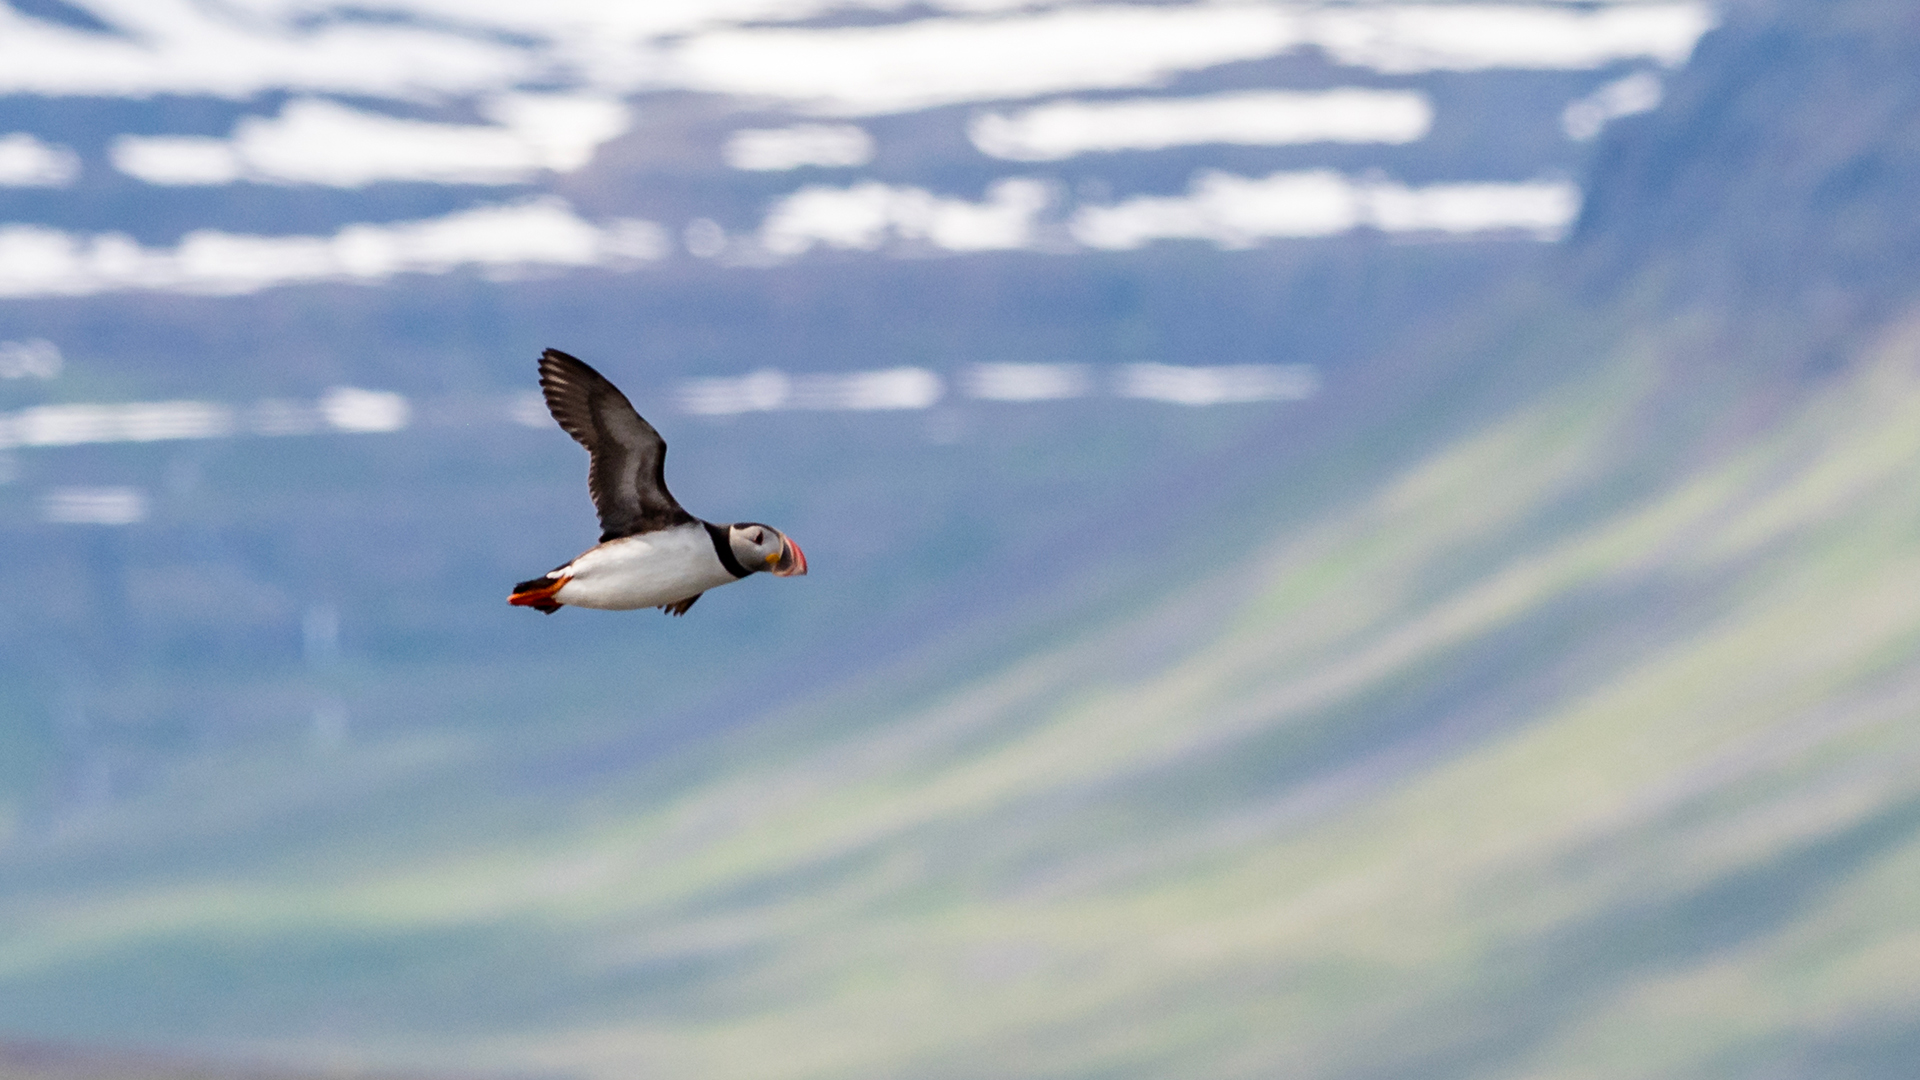 Atlantic puffins are the main attraction. These heavy diving birds buzz around the island in all directions. Capturing them in flight is challenging but rewarding!